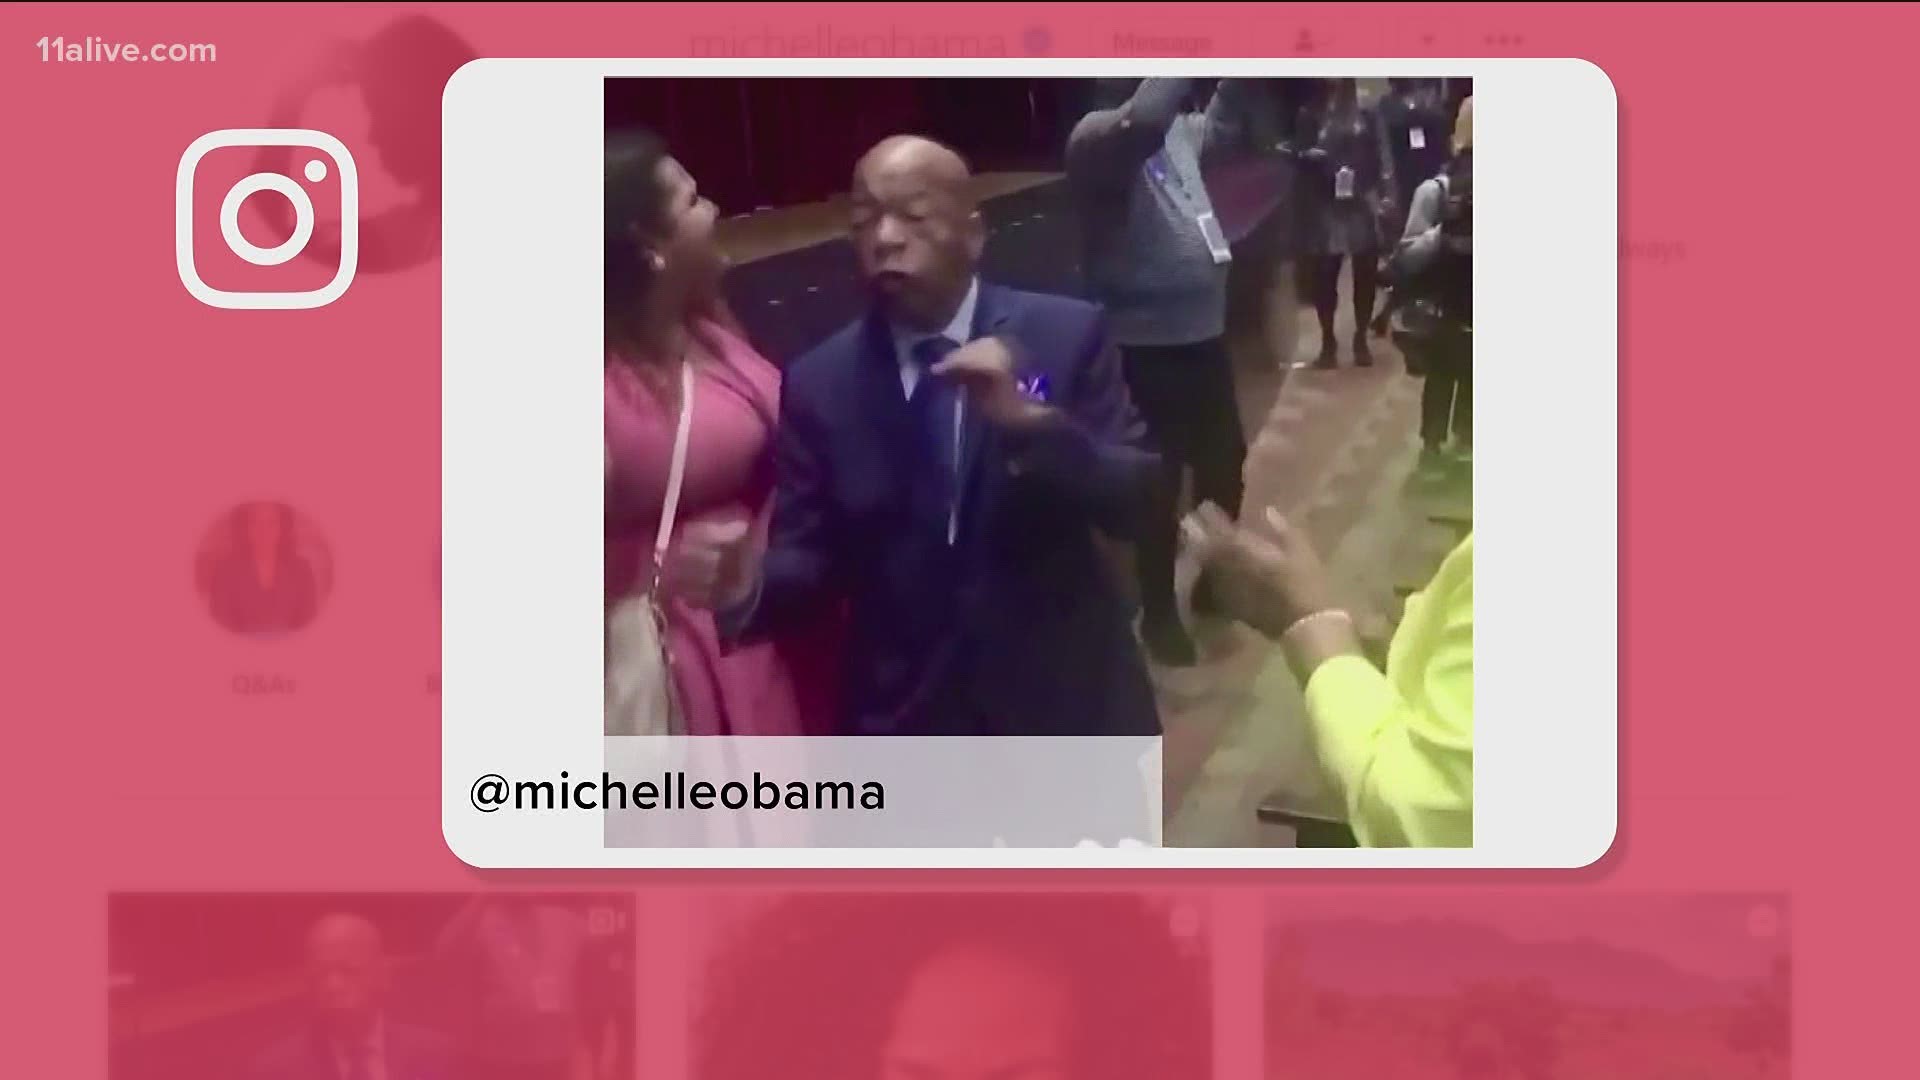 Michelle Obama shared the memory on her social media.